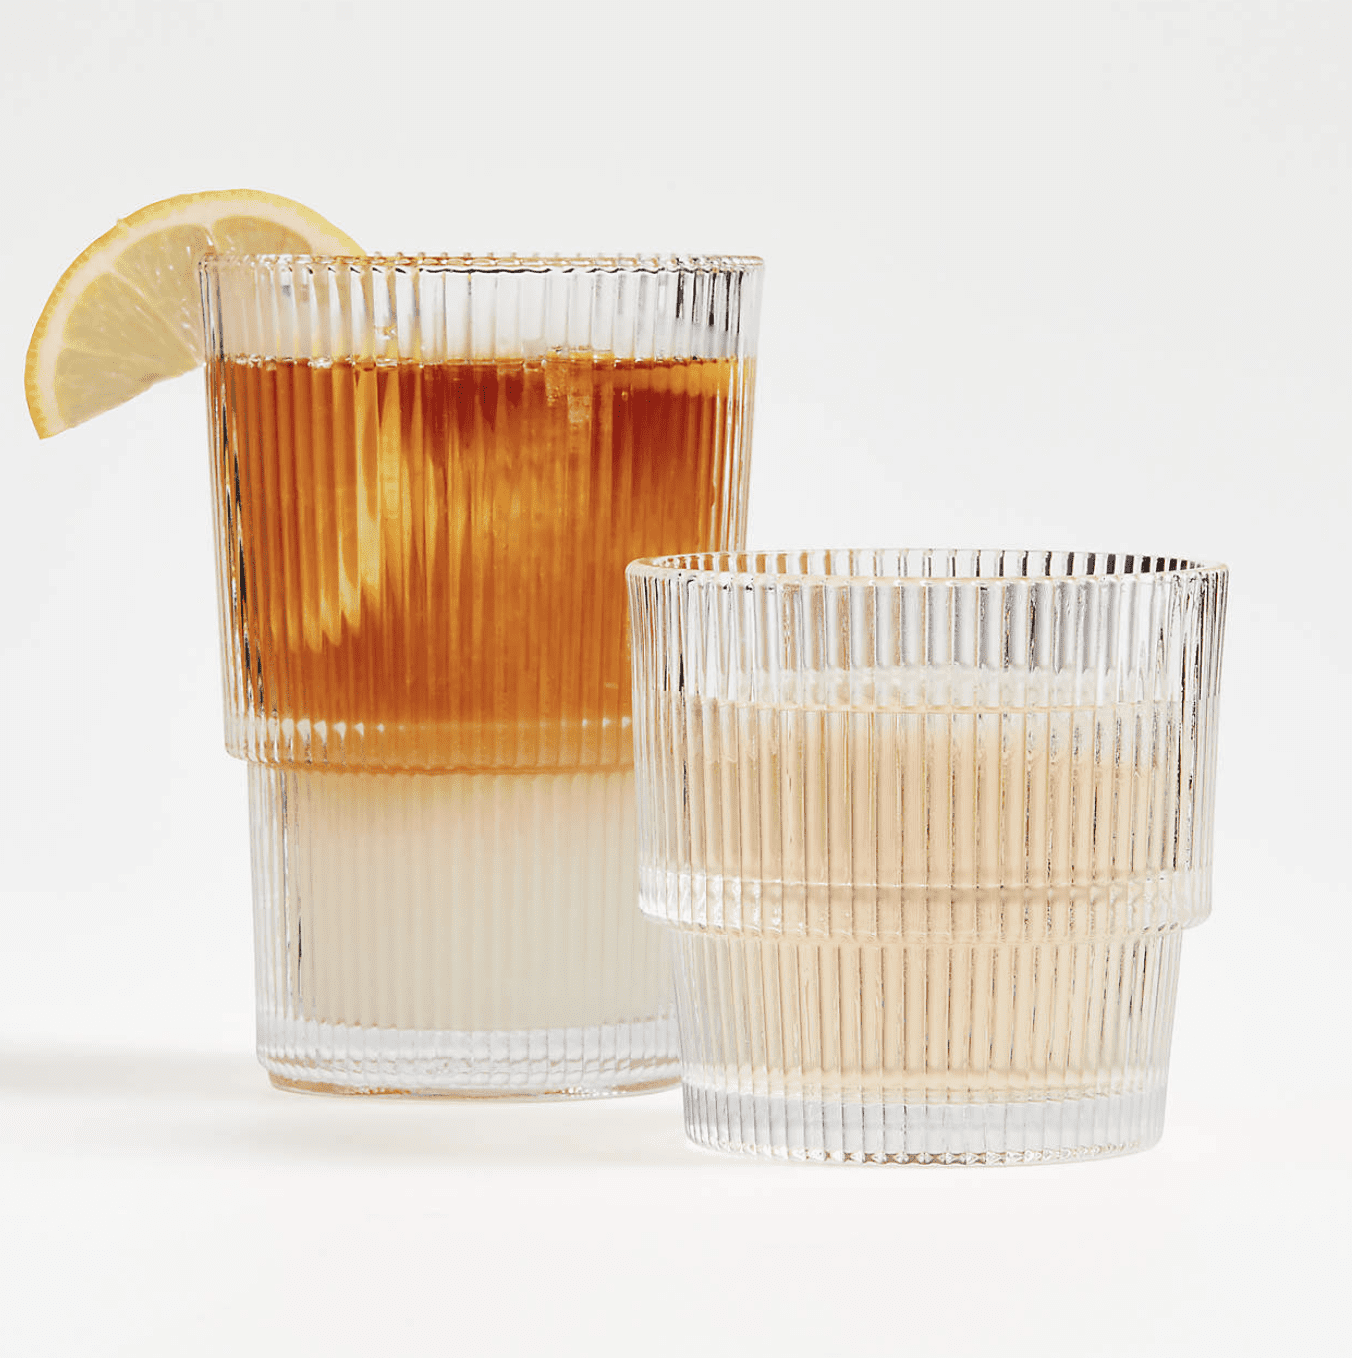 WHJY Ribbed Glassware Highball Glasses Unique Everyday Drinking Glasses  Short Glasses Cups Set of 4 …See more WHJY Ribbed Glassware Highball  Glasses